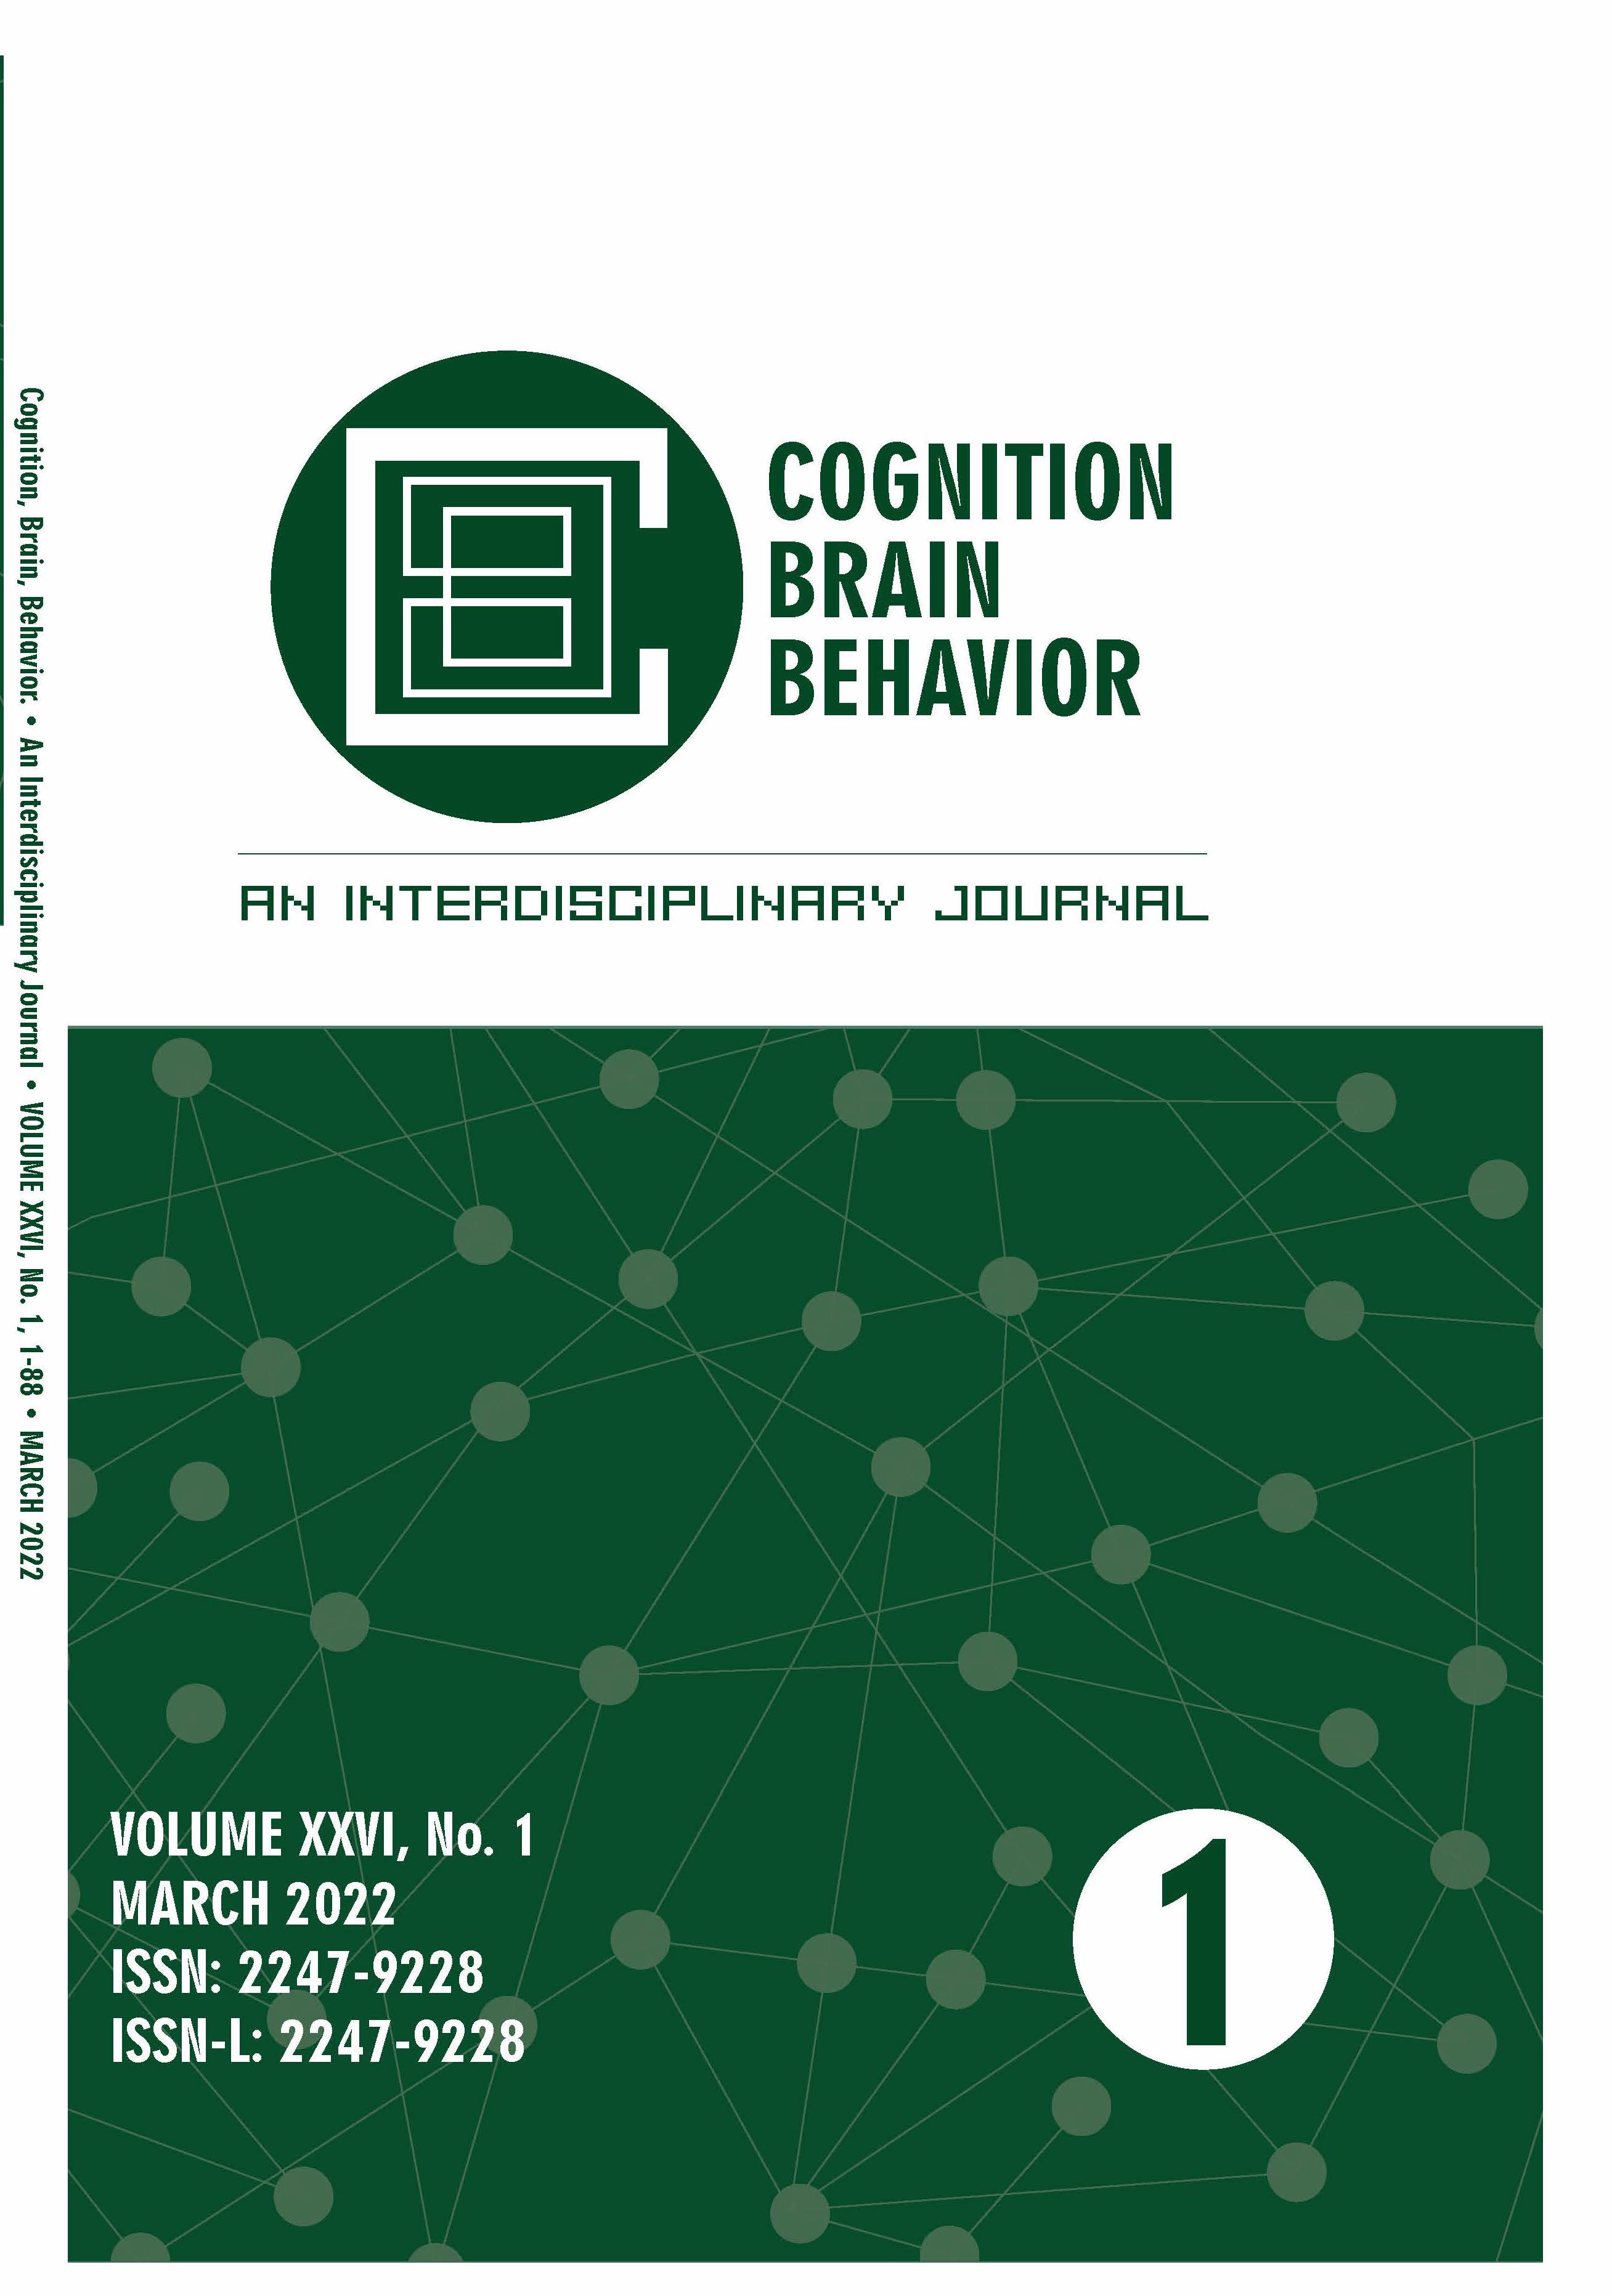 Personality and mental health: Factors impacting perceived health risks and protective behaviors during the early COVID-19 quarantine